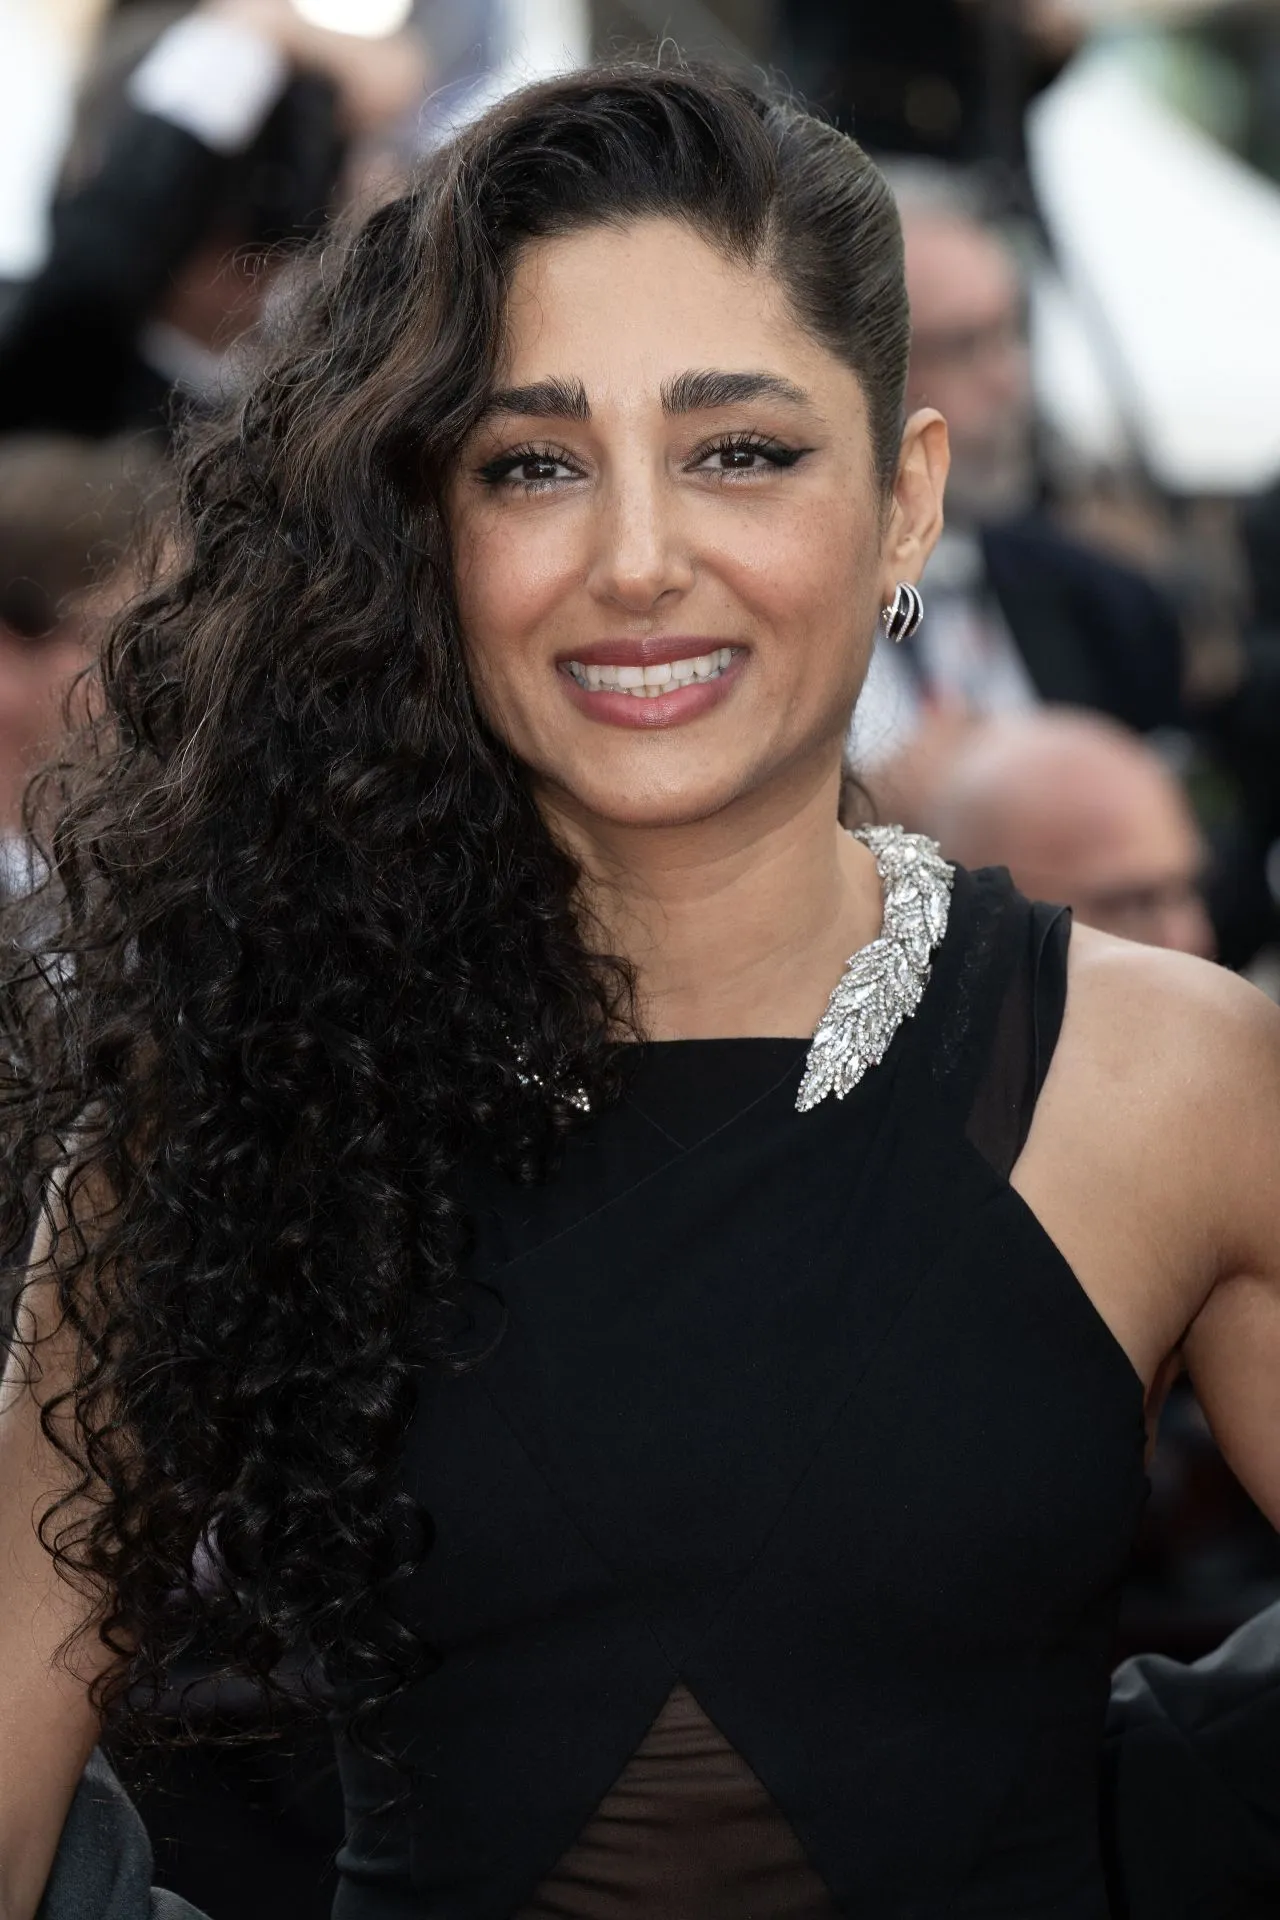 GOLSHIFTEH FARAHANI AT THE MOST PRECIOUS OF CARGOES PREMIERE AT CANNES FILM FESTIVAL